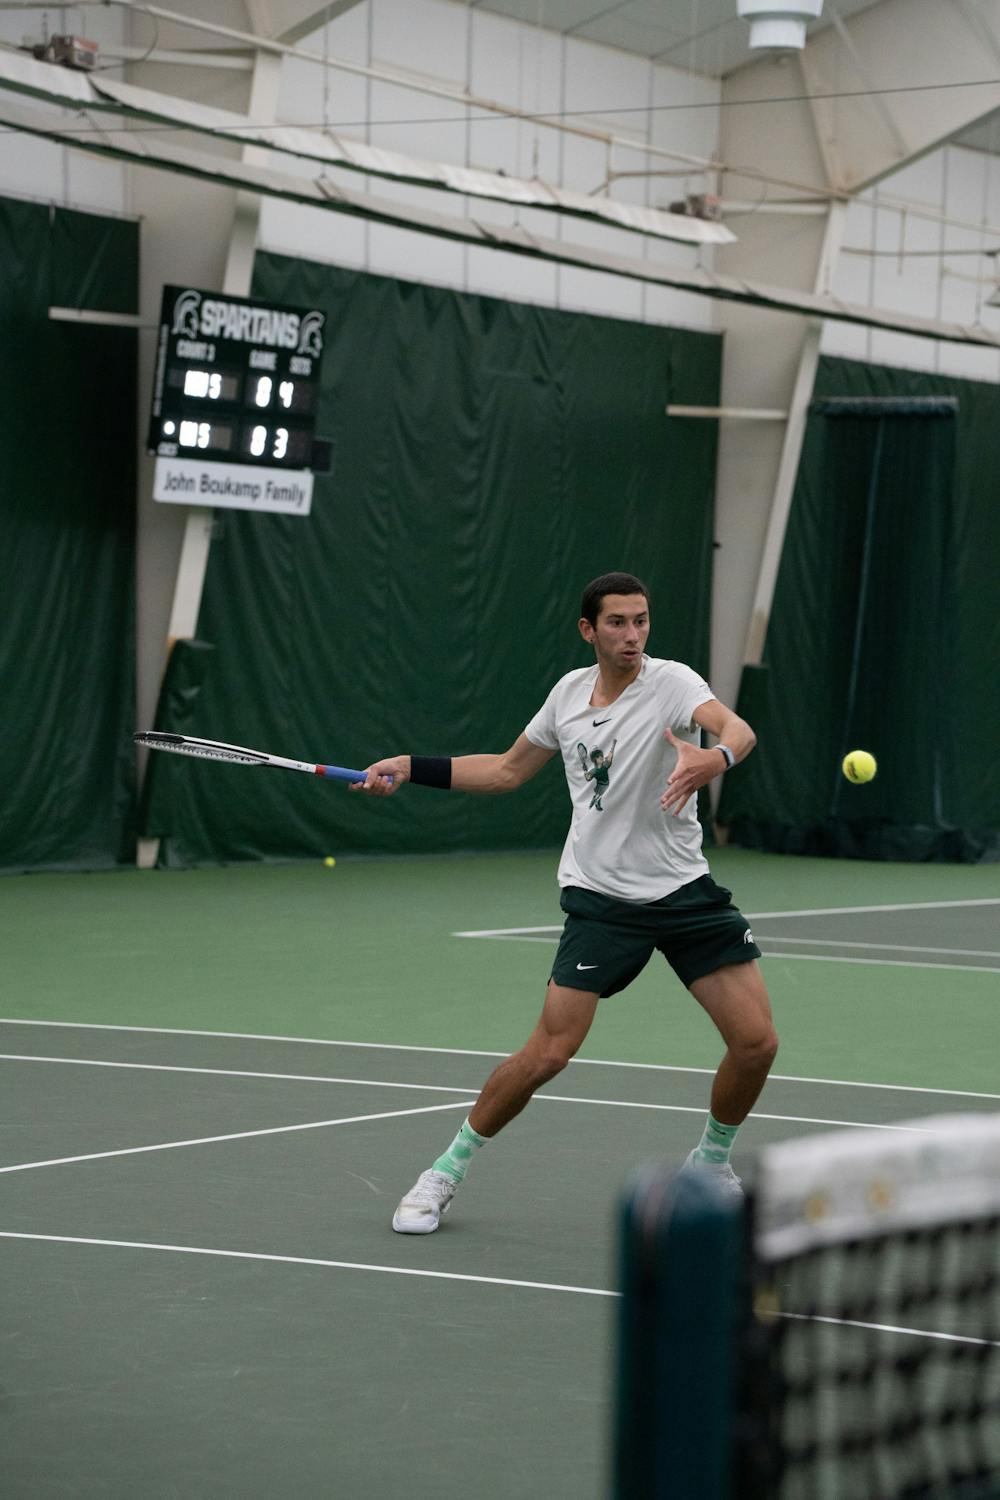 <p>Freshman Ozan Baris gets ready to return the ball during his singles against Michigan senior Ondrej Styler at the MSU Tennis Center on March 30, 2023. The Spartans lost to the Wolverines 6-1.</p>